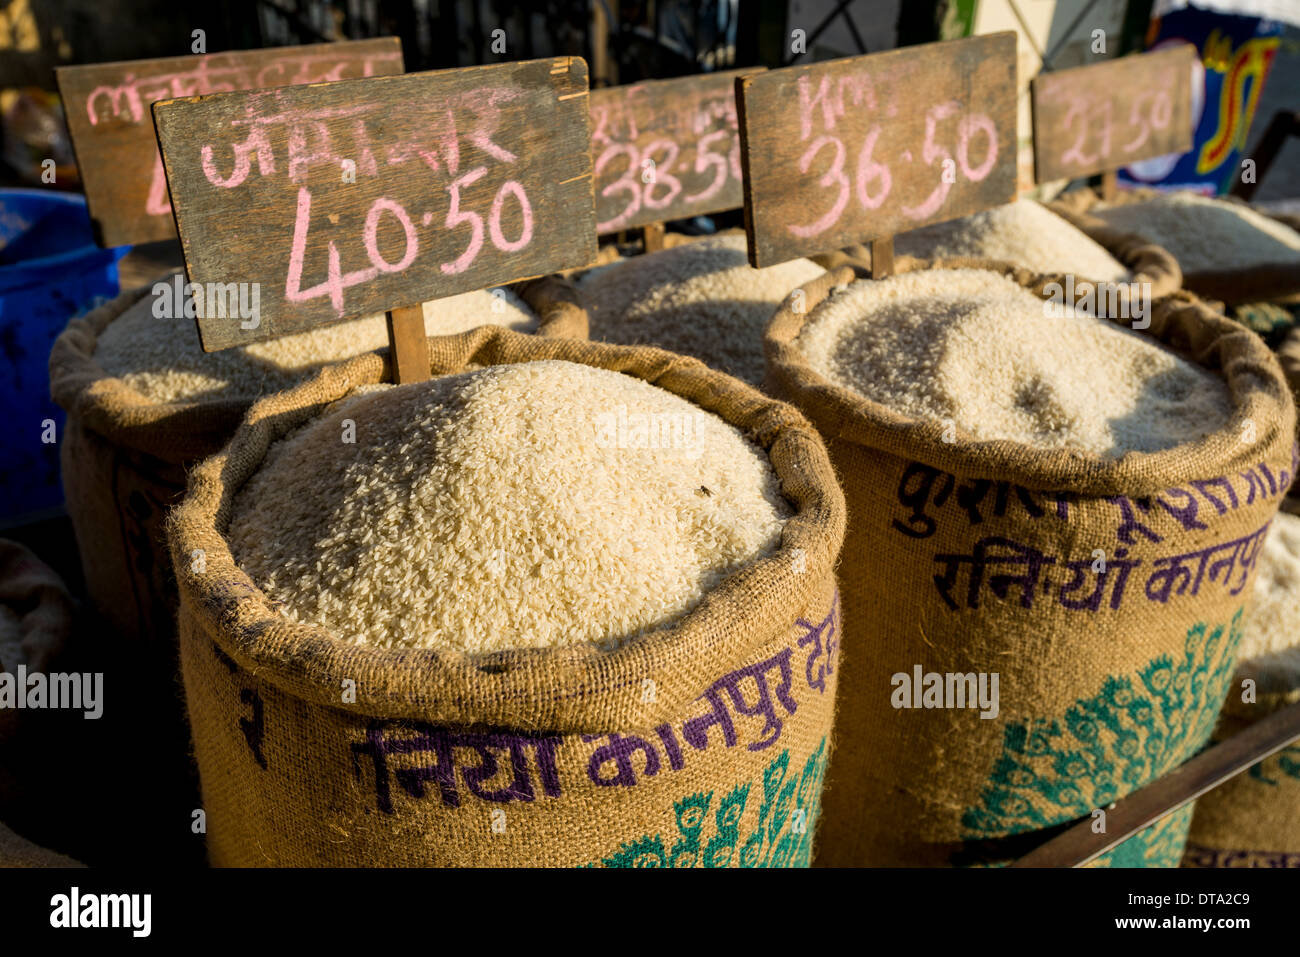 Rice in different qualities for sale in bags at an open air market, Mumbai, Maharashtra, India Stock Photo